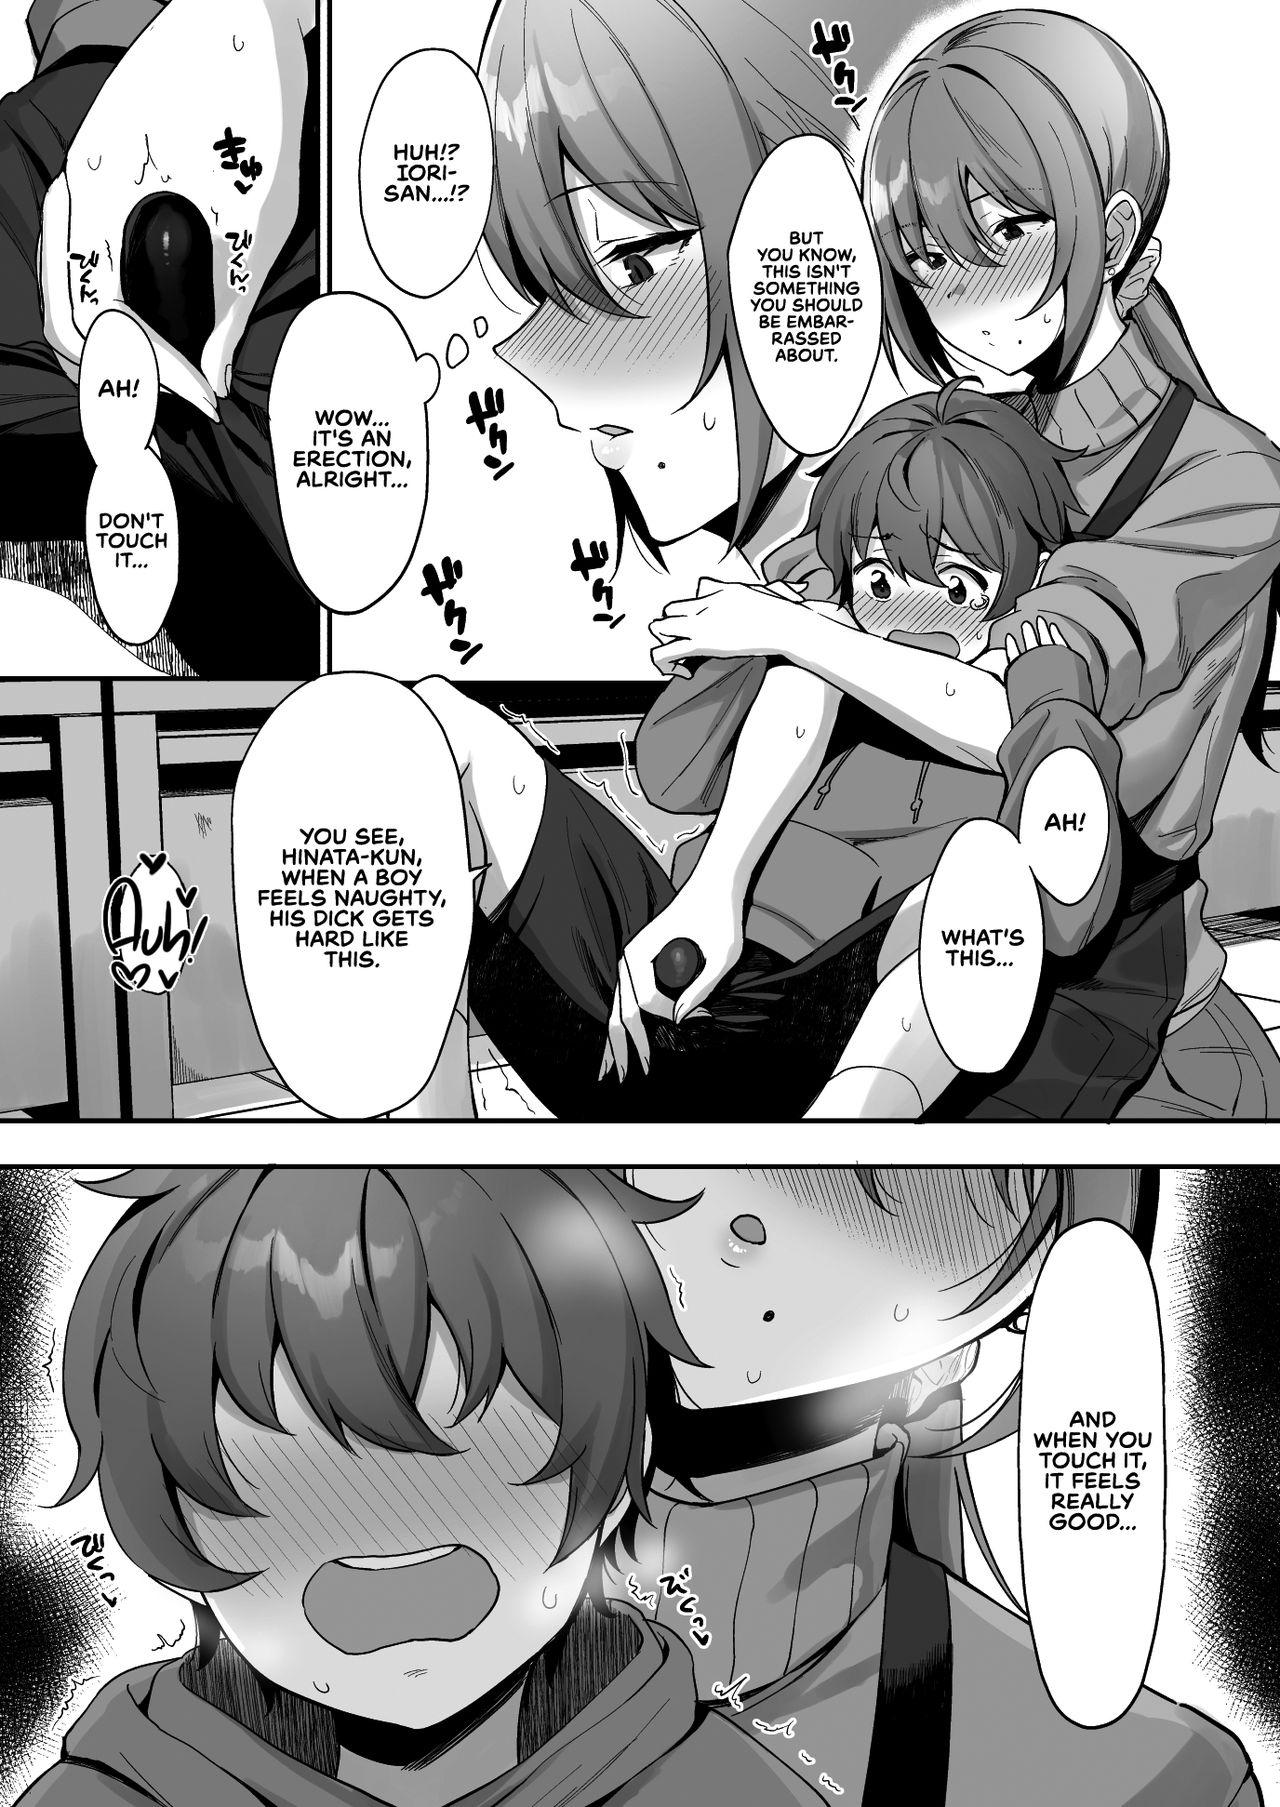 Fantasy Massage Furuhonya no Onee-san to | With The Lady From The Used Book Shop - Original Ejaculations - Page 10